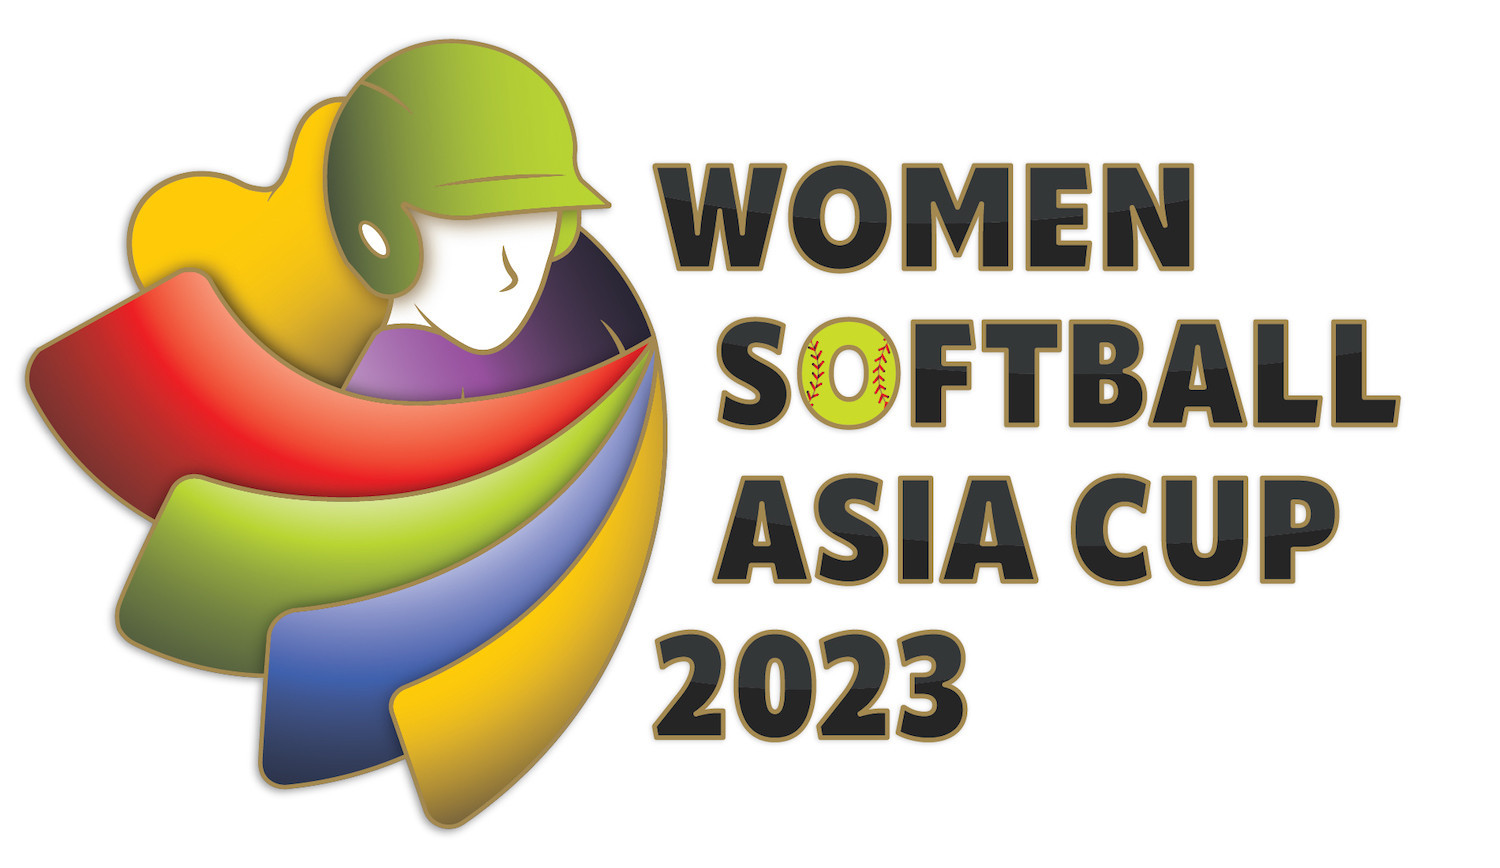 The WBSC has launched its new logo for the Women's Softball Asia Cup ©WBSC